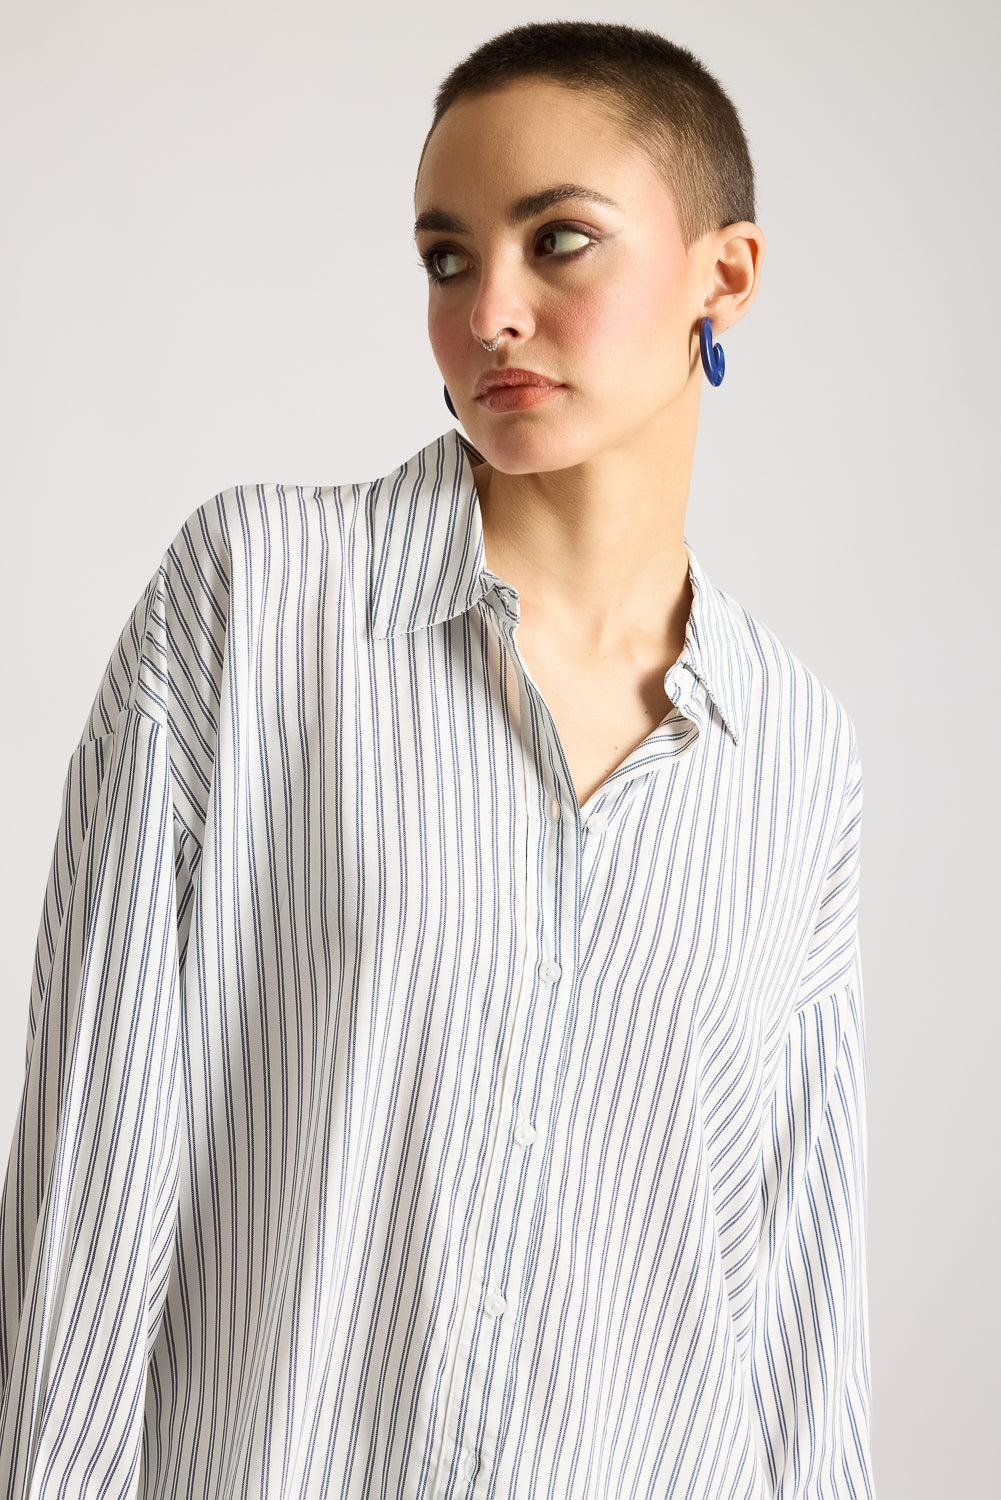 Women's Relaxed Fit Shirt - Navy Blue Stripes